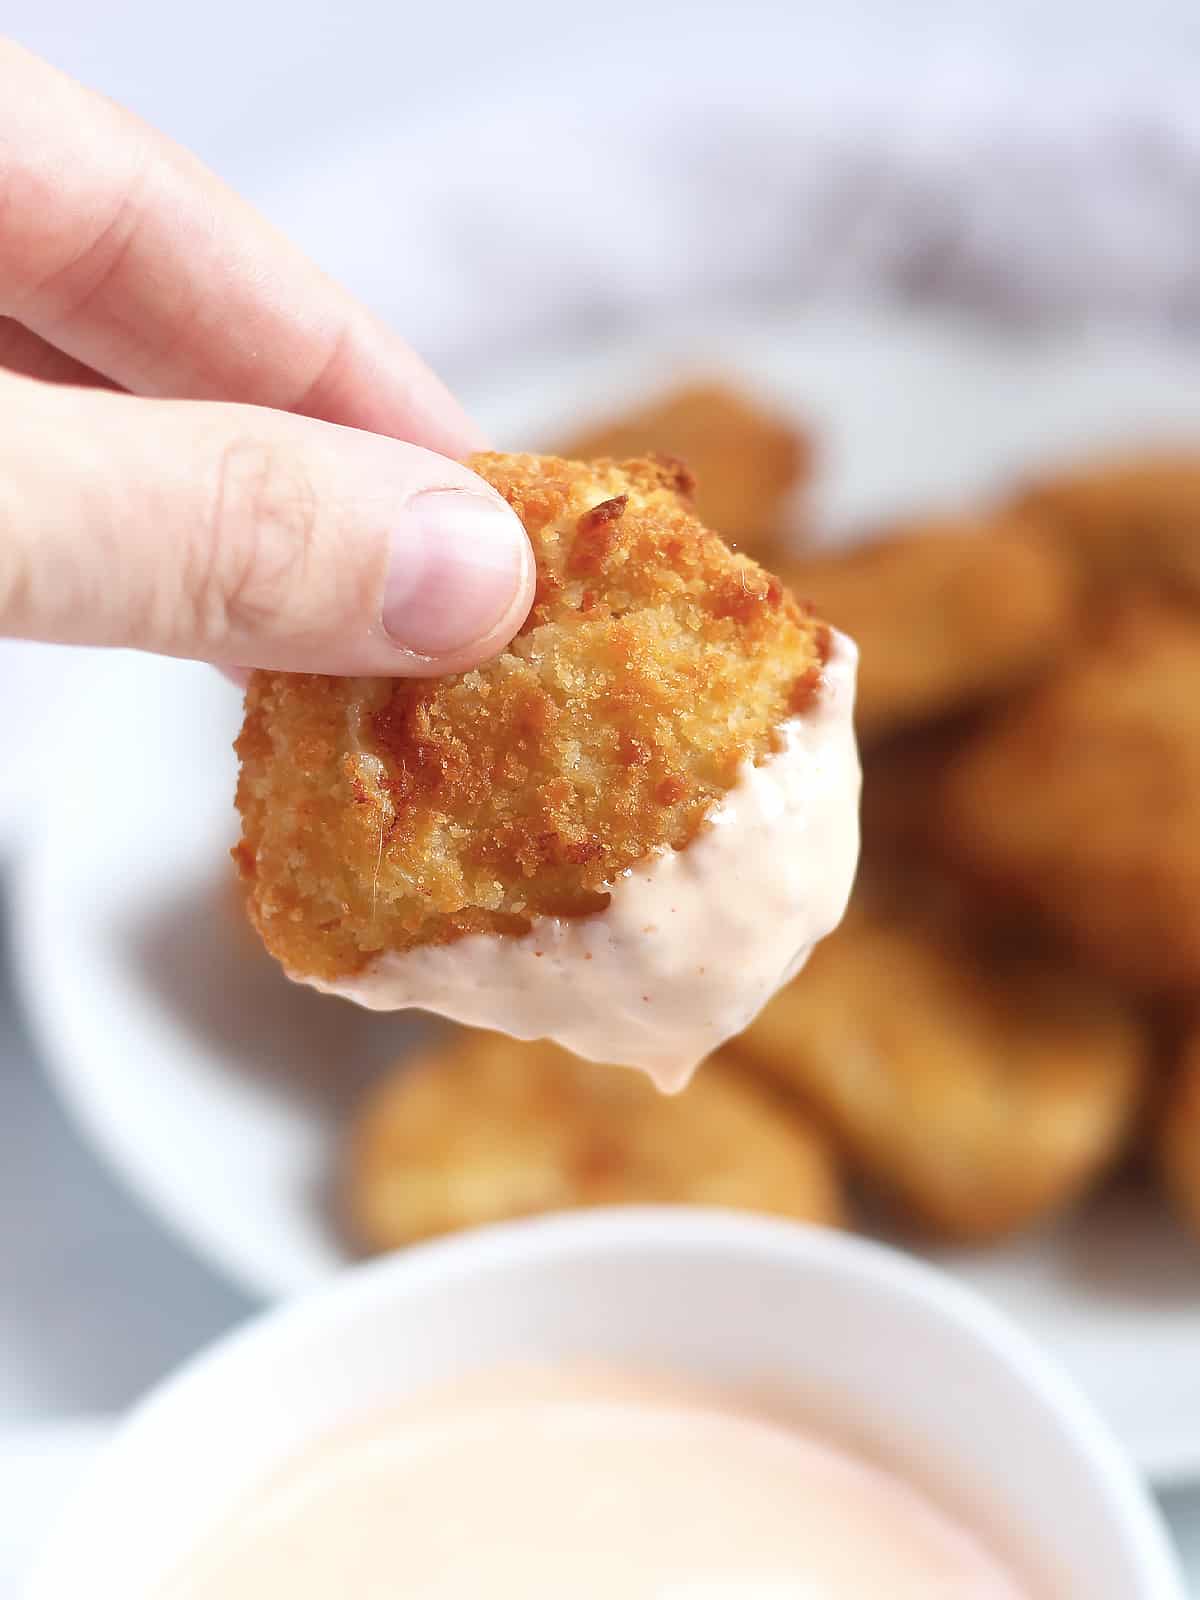 A chicken nugget being dipped in a sauce.